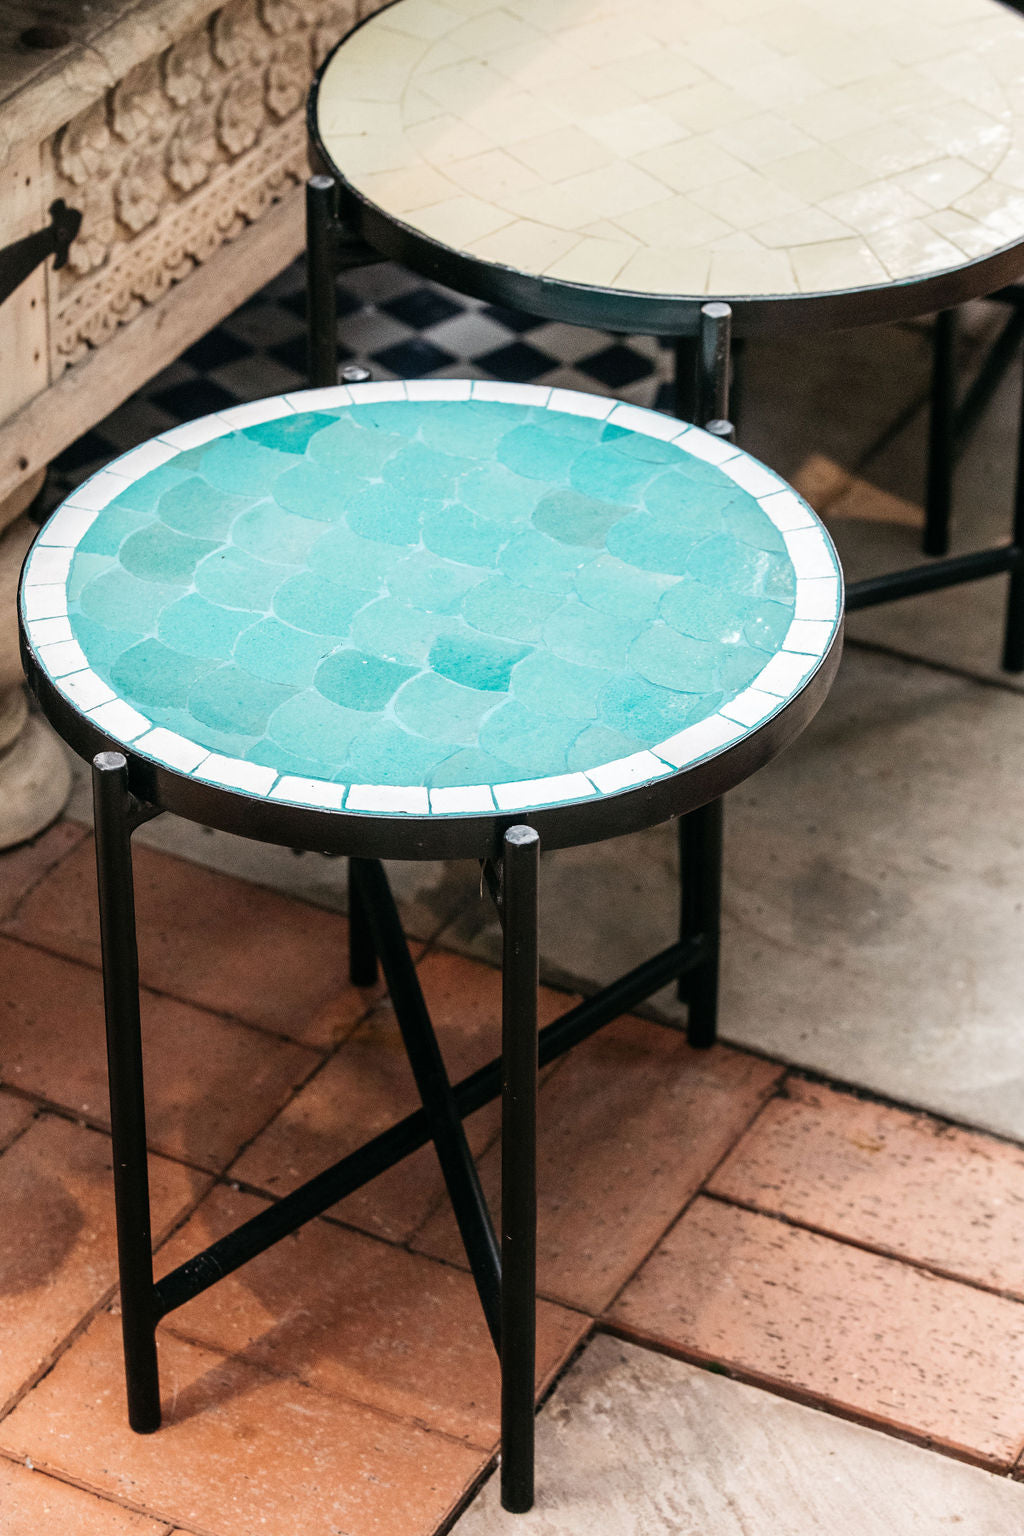 Moroccan Aqua and White Fish Scaled Tiled Table